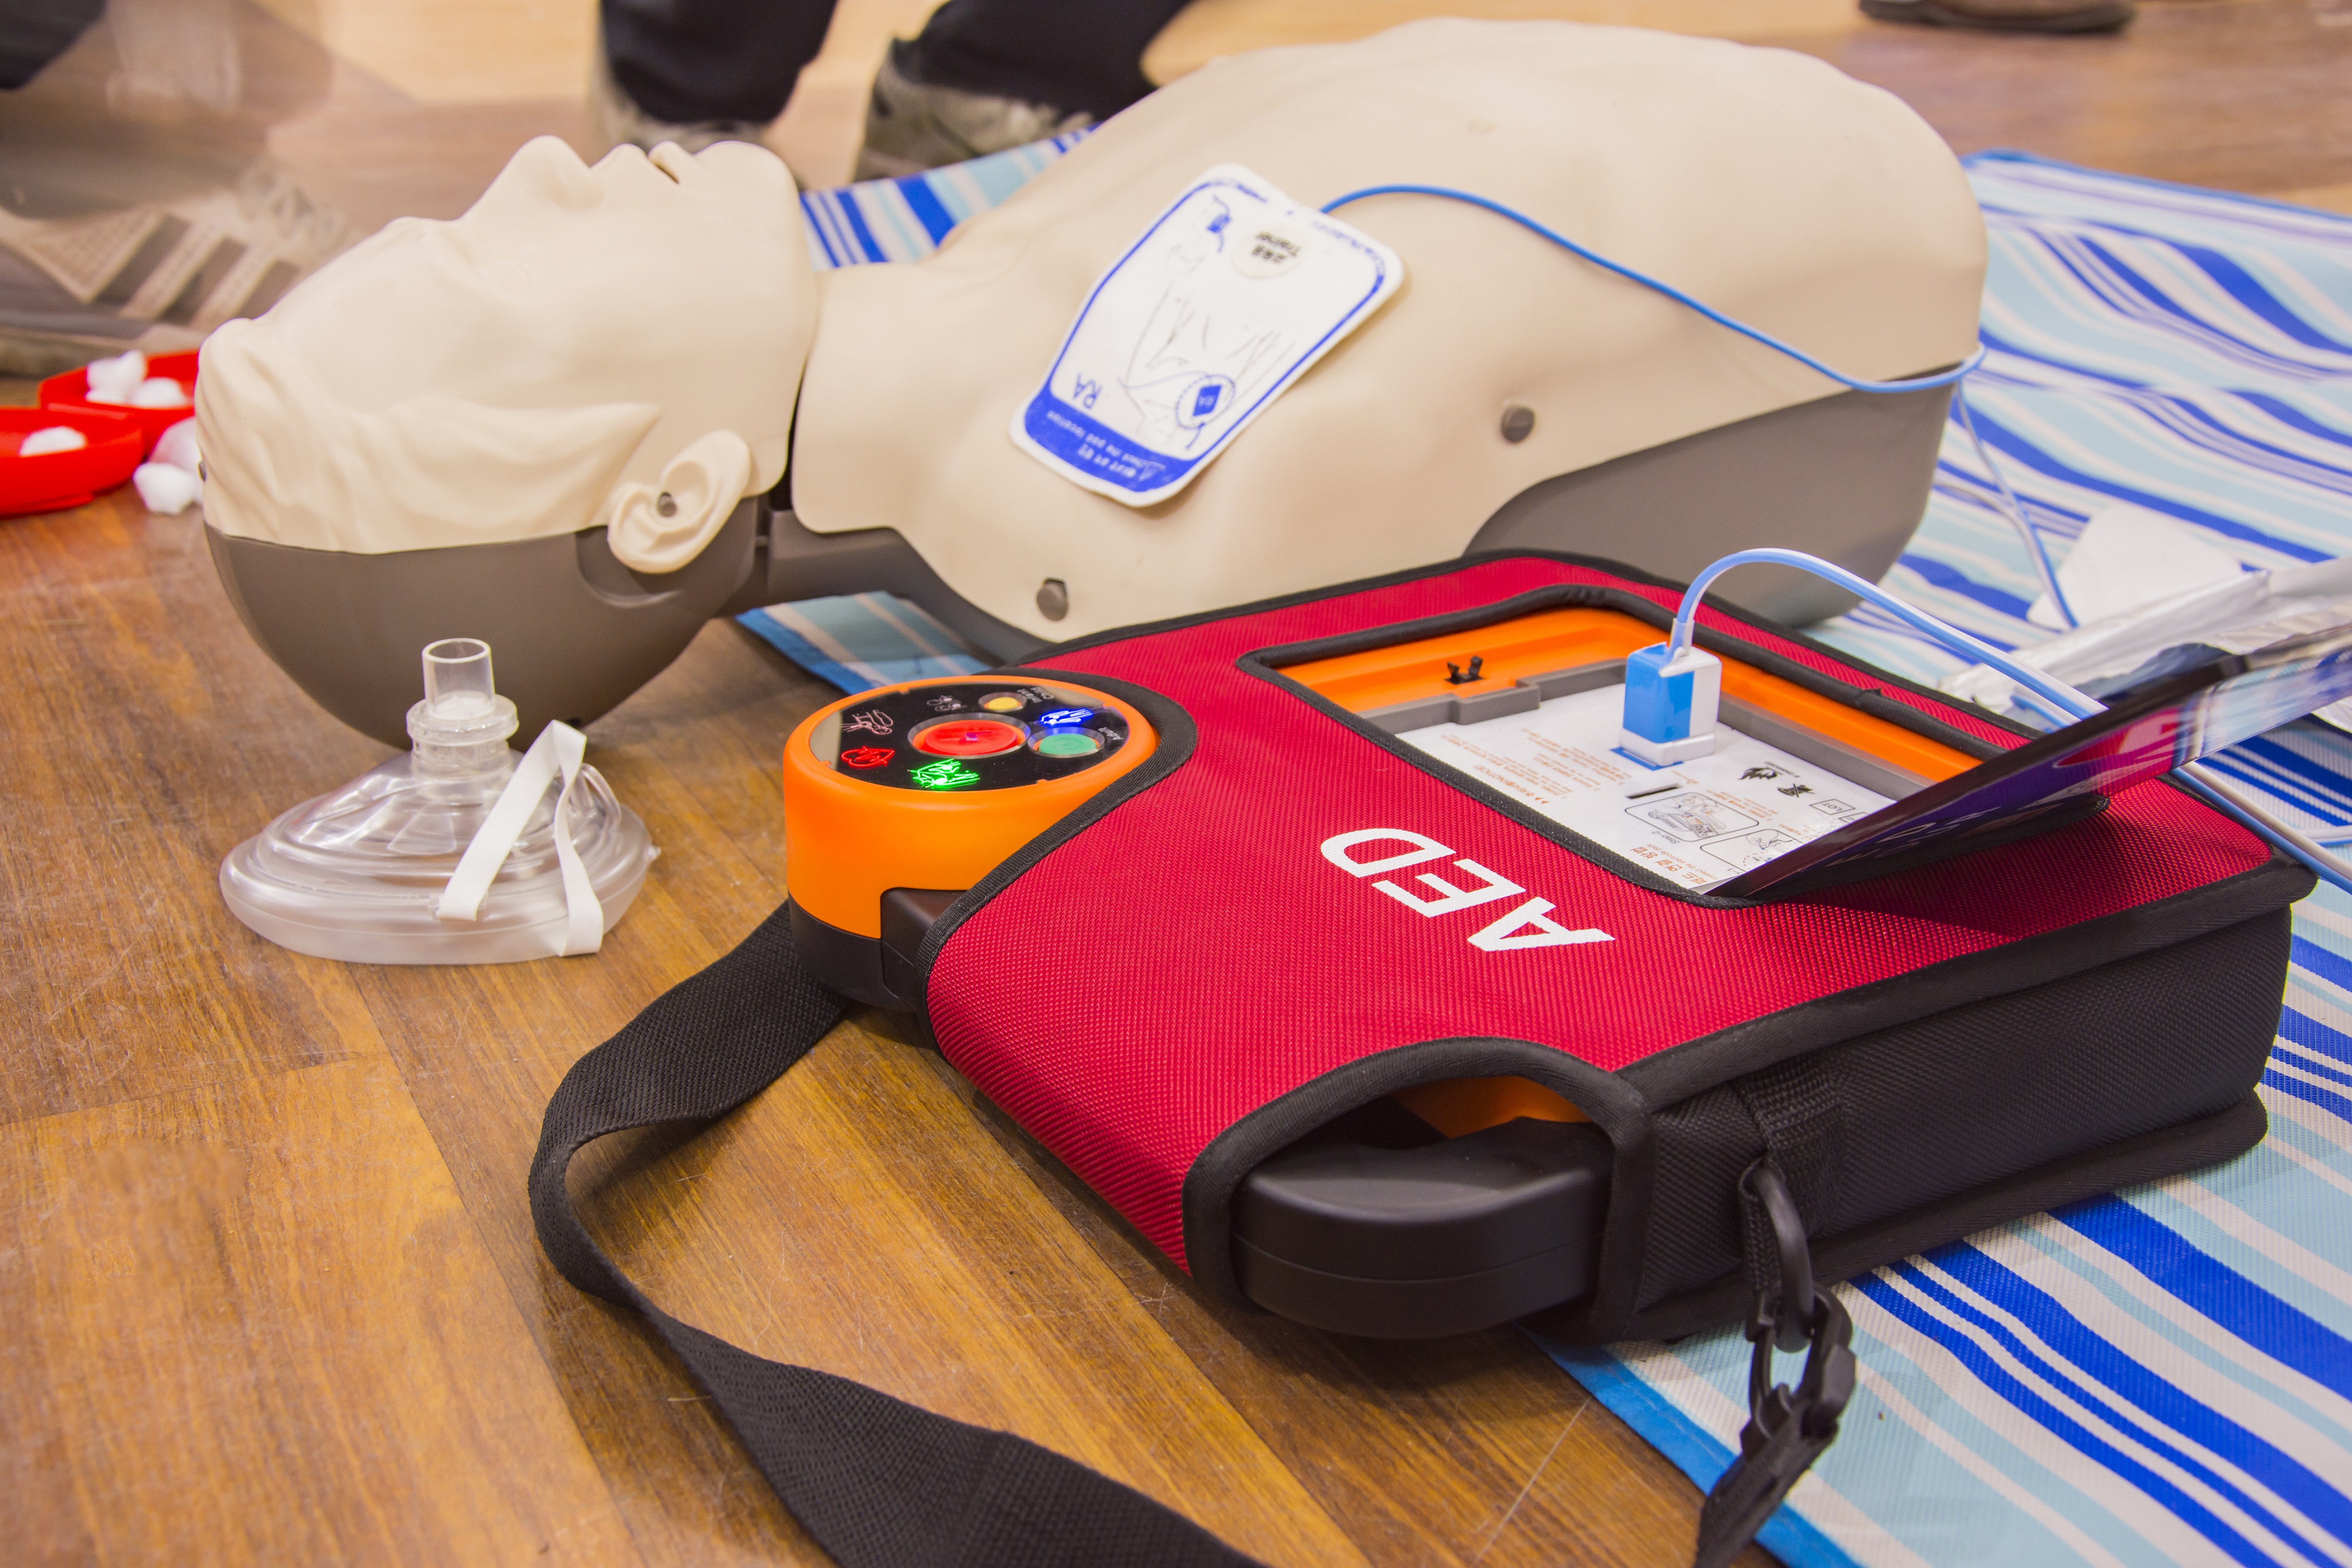 CPR AED First Aid Training Class May 21, 2022 in Tigard